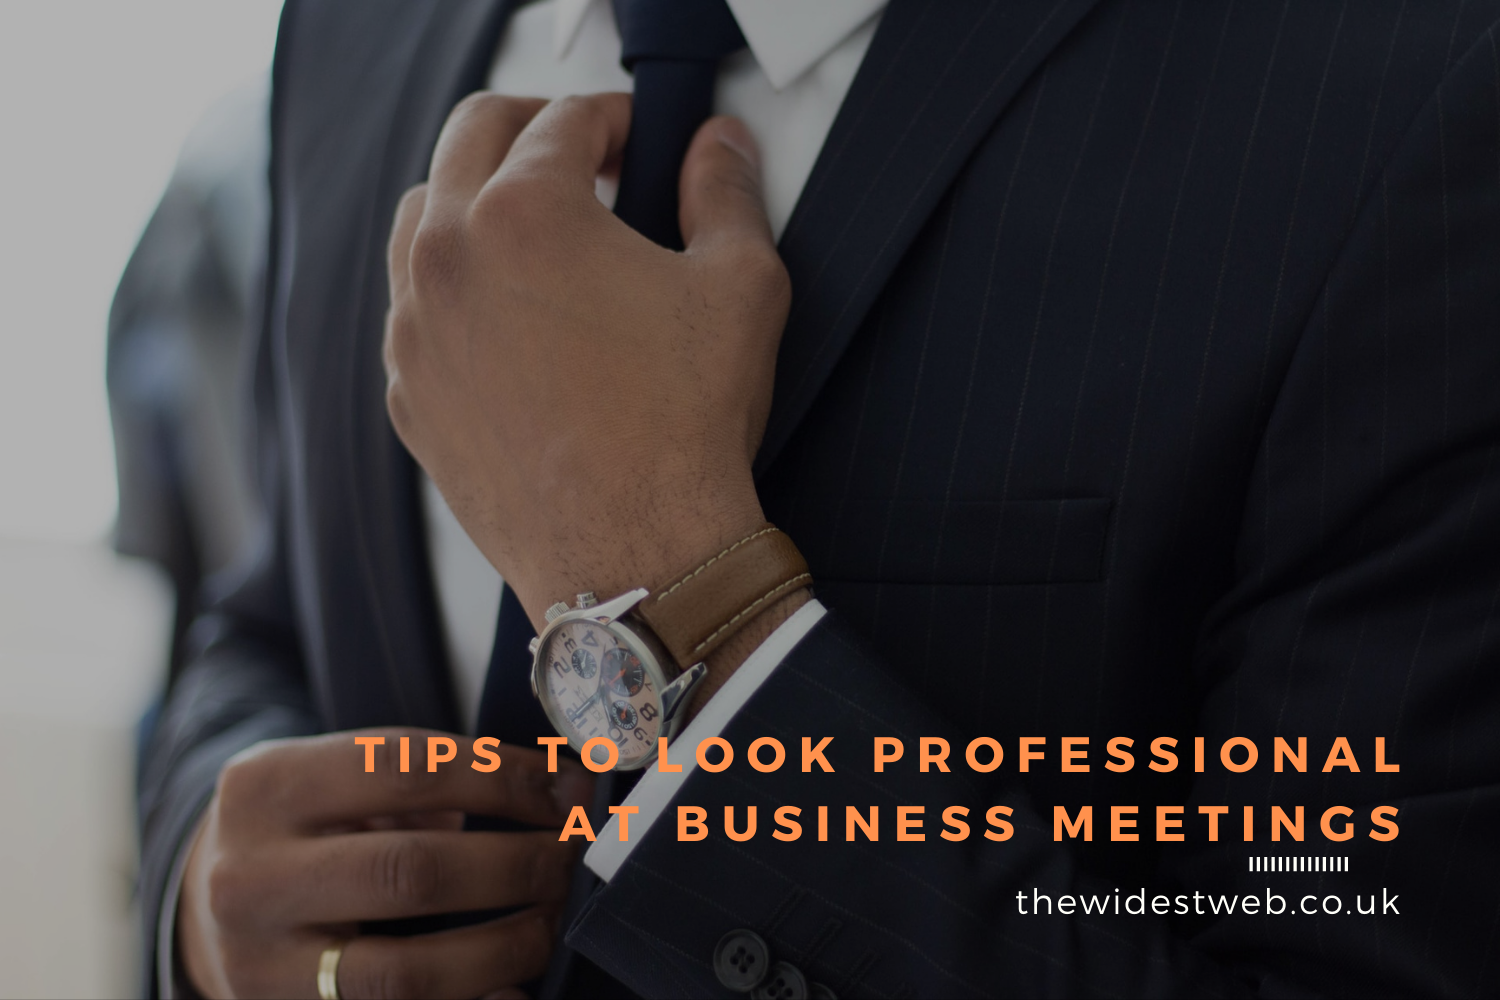 How to Always Look Professional at Business Meetings as a Thriving Business Manager?